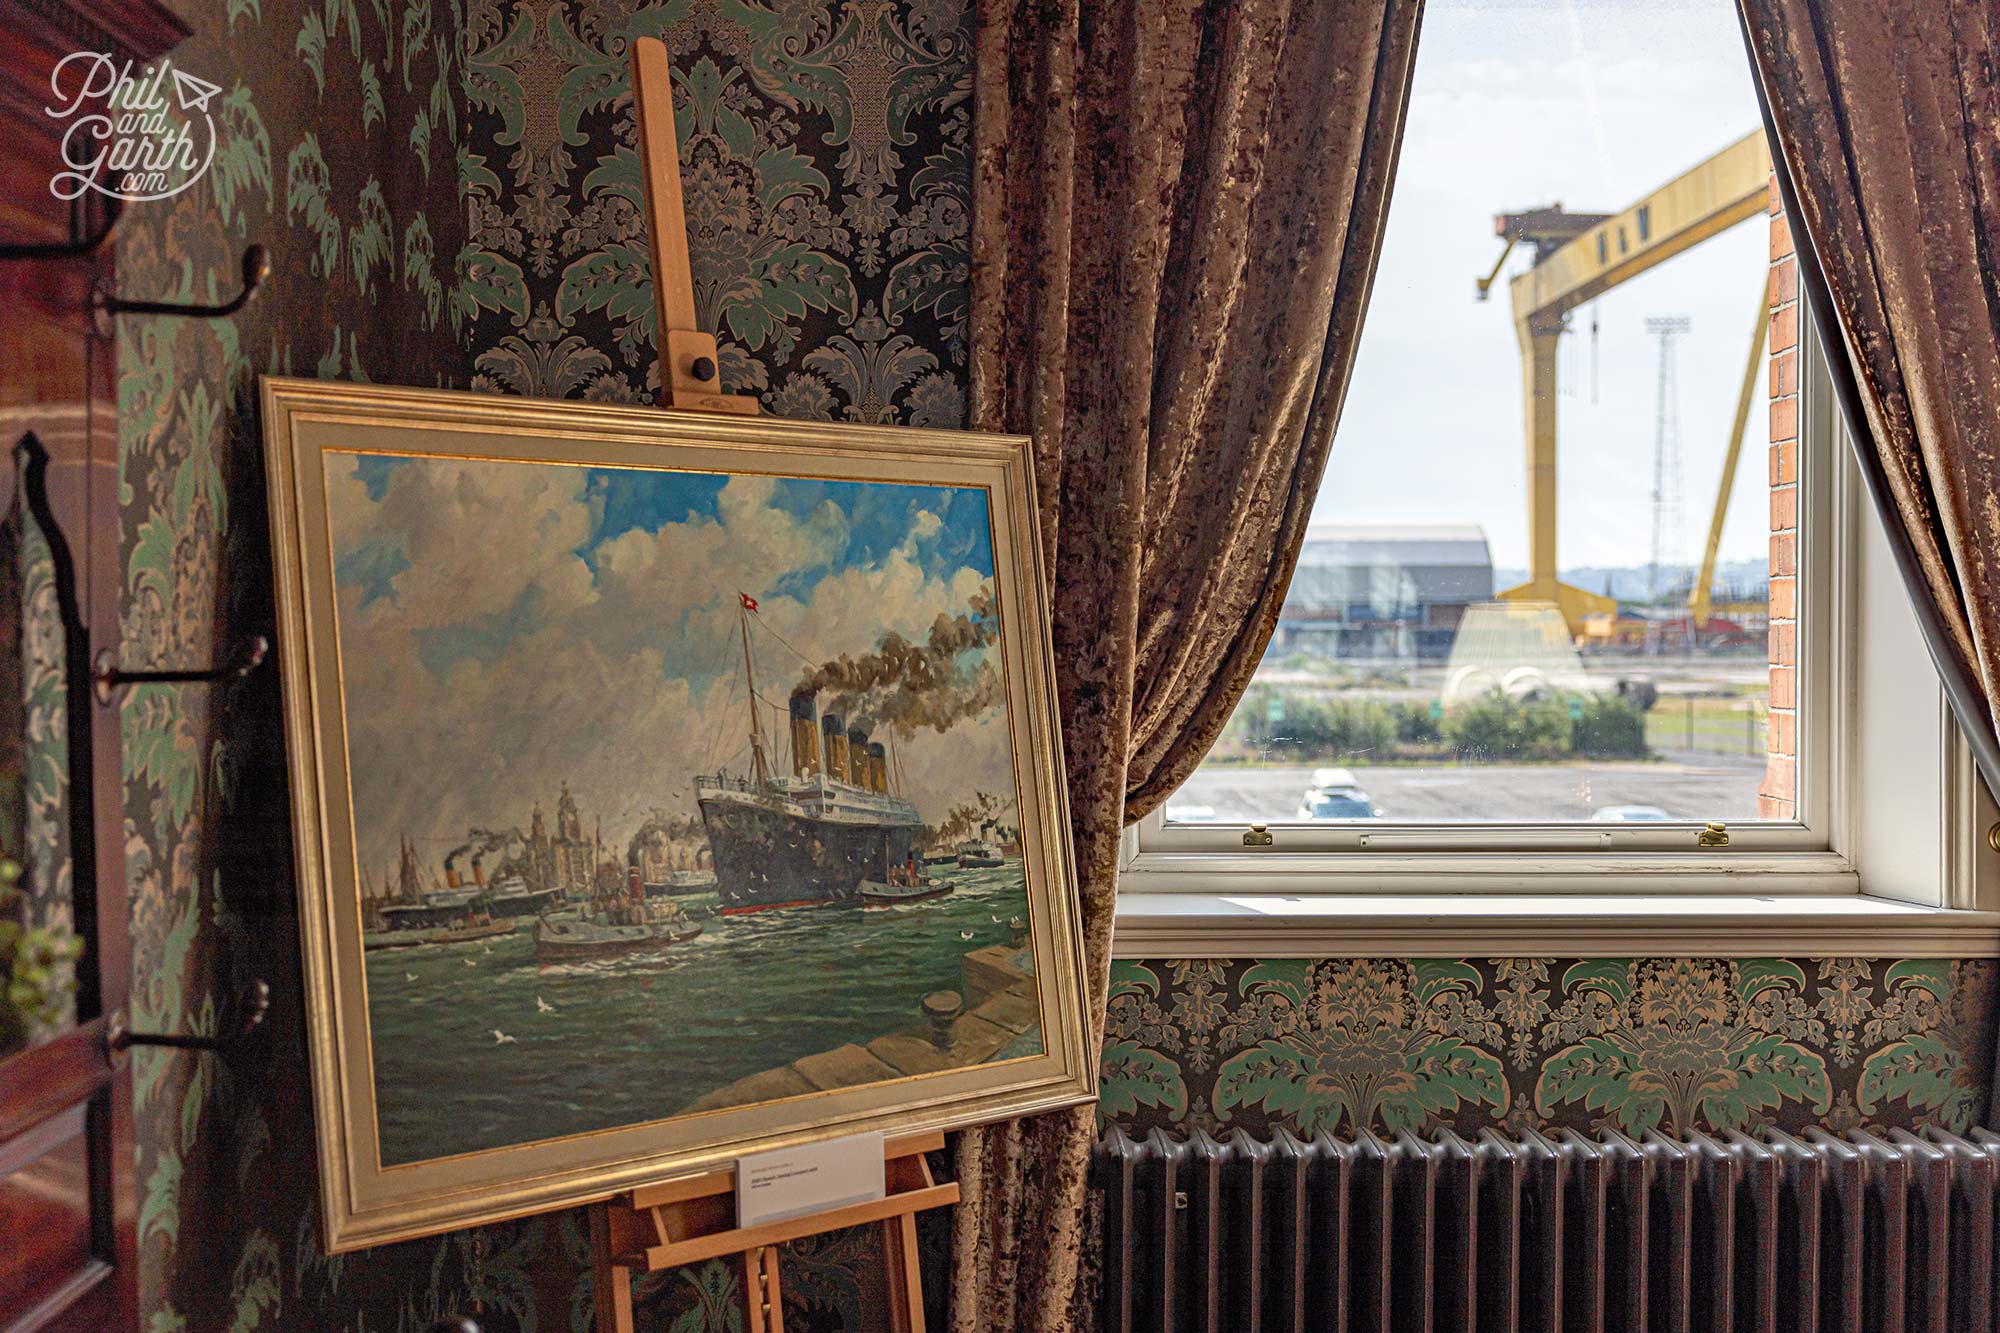 A painting of Titanic leaving Liverpool in the Presentation Room